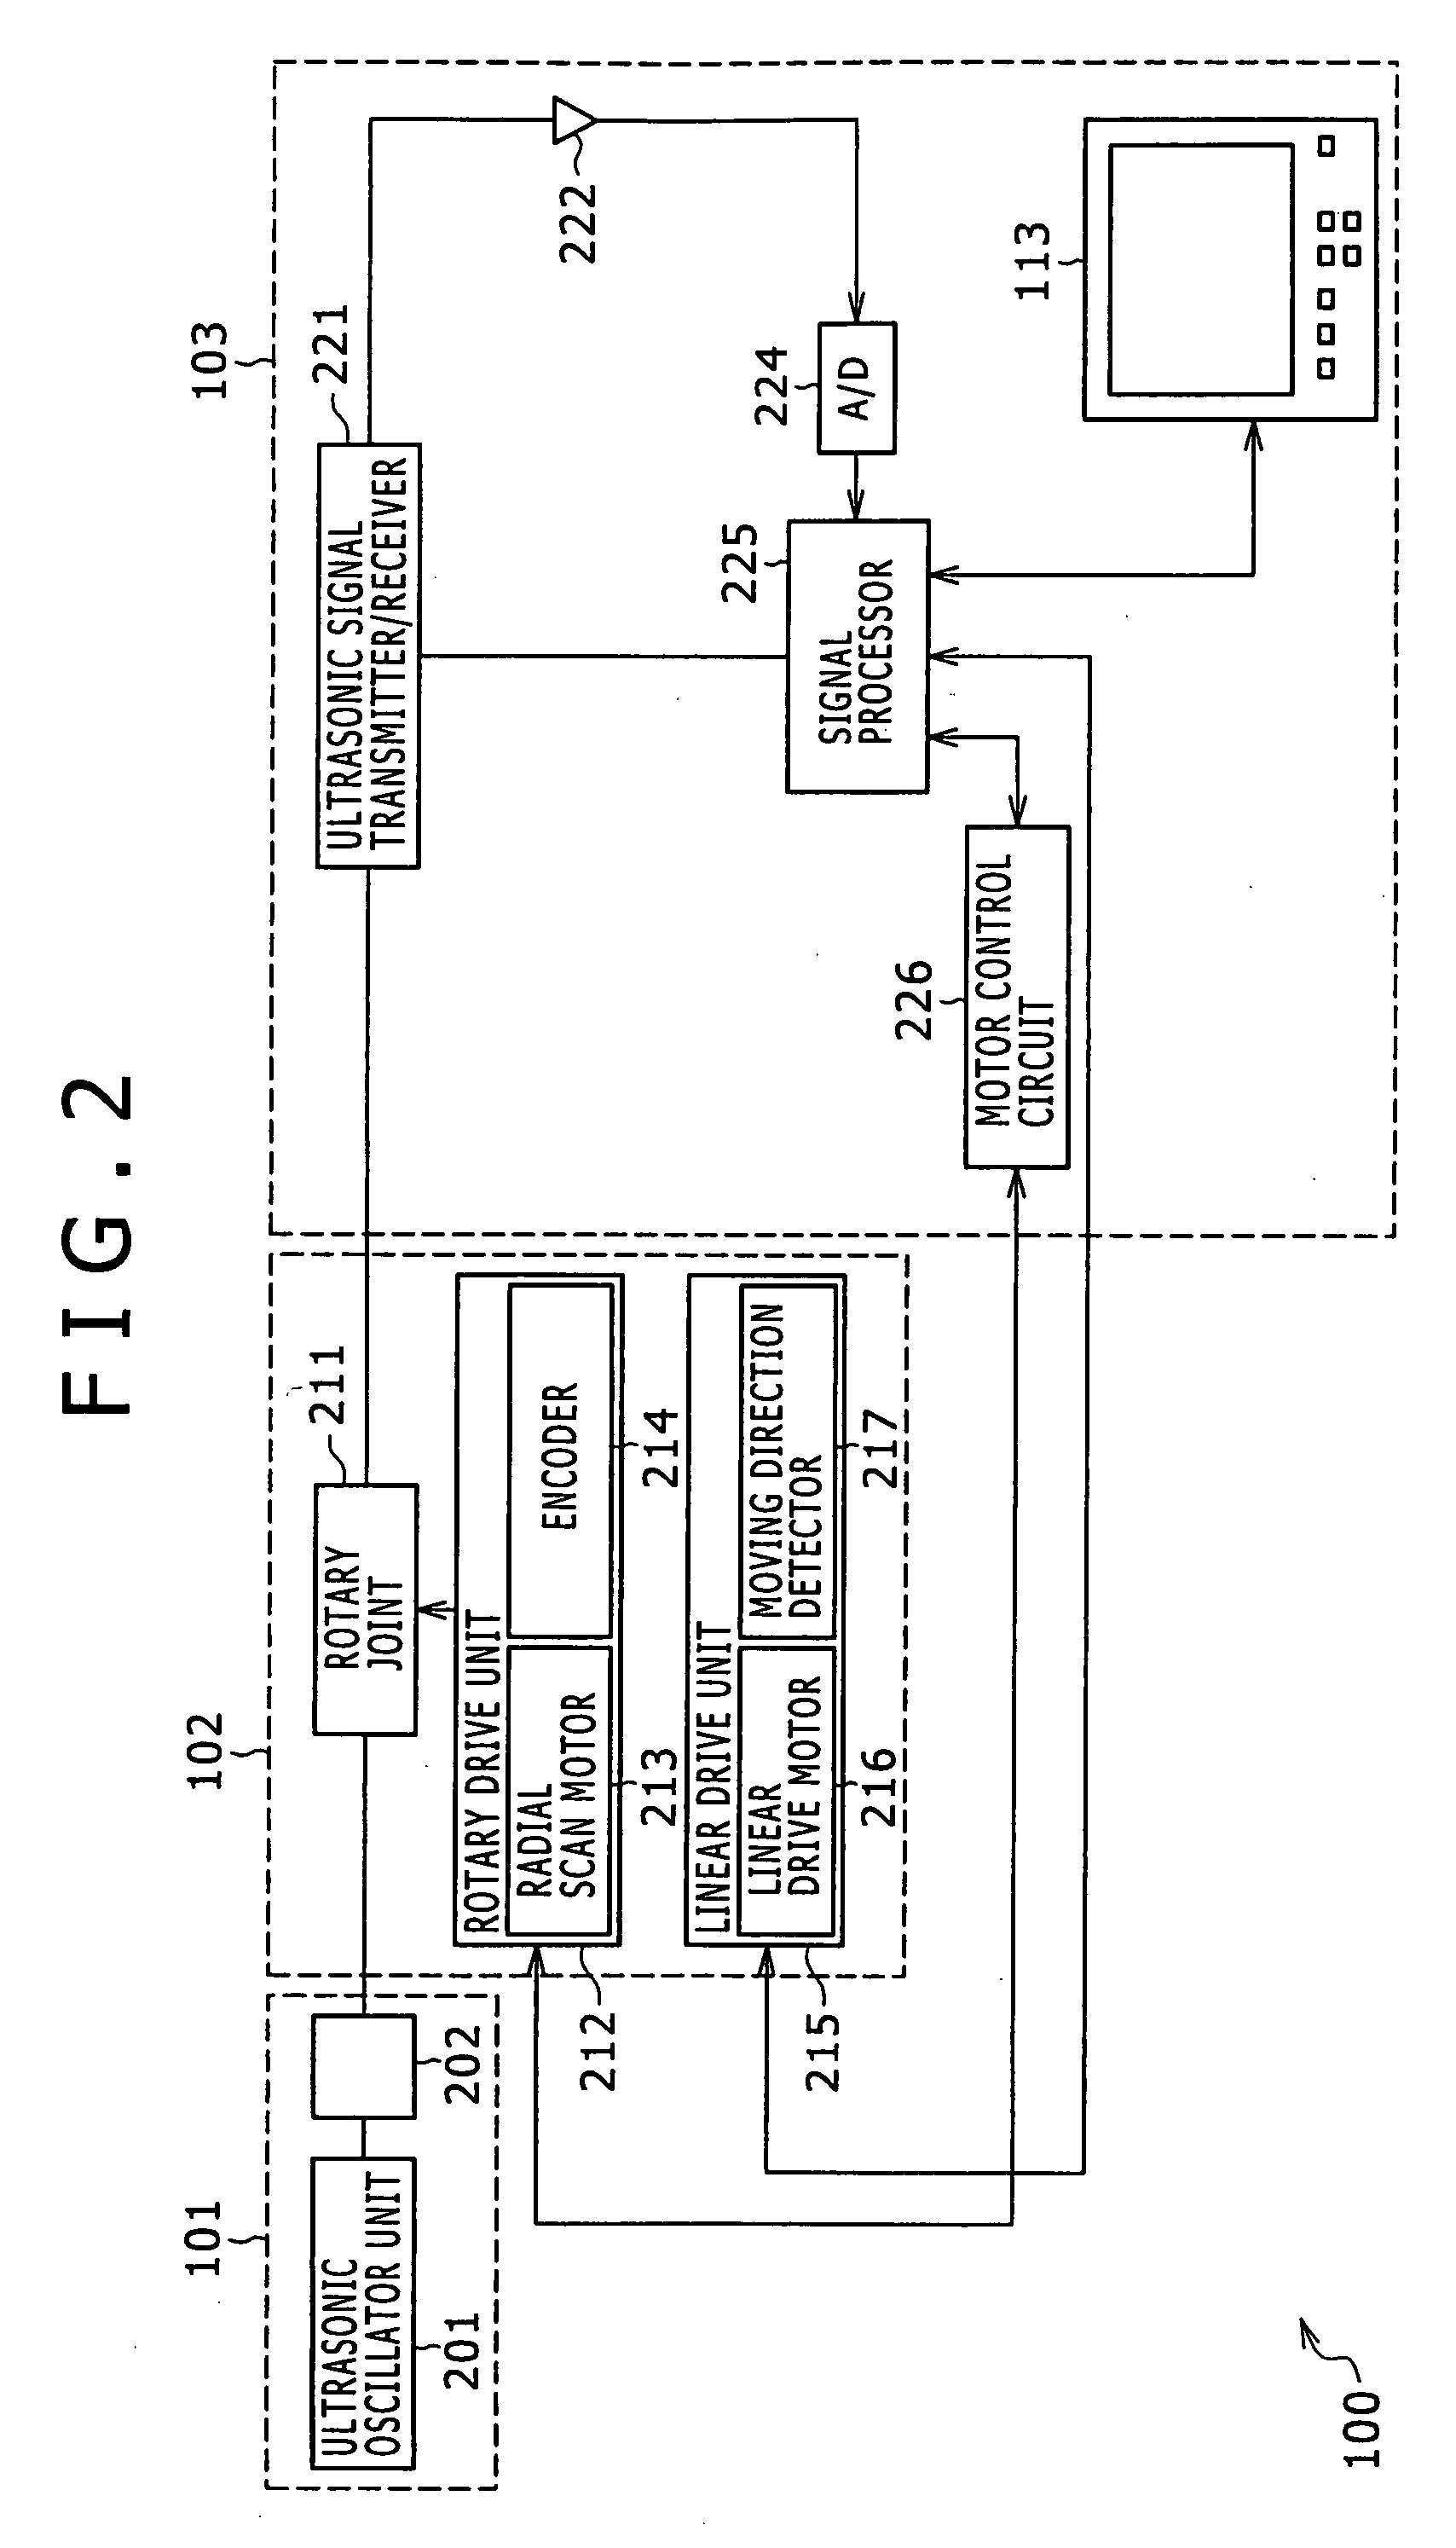 Probe, image diagnostic system and catheter